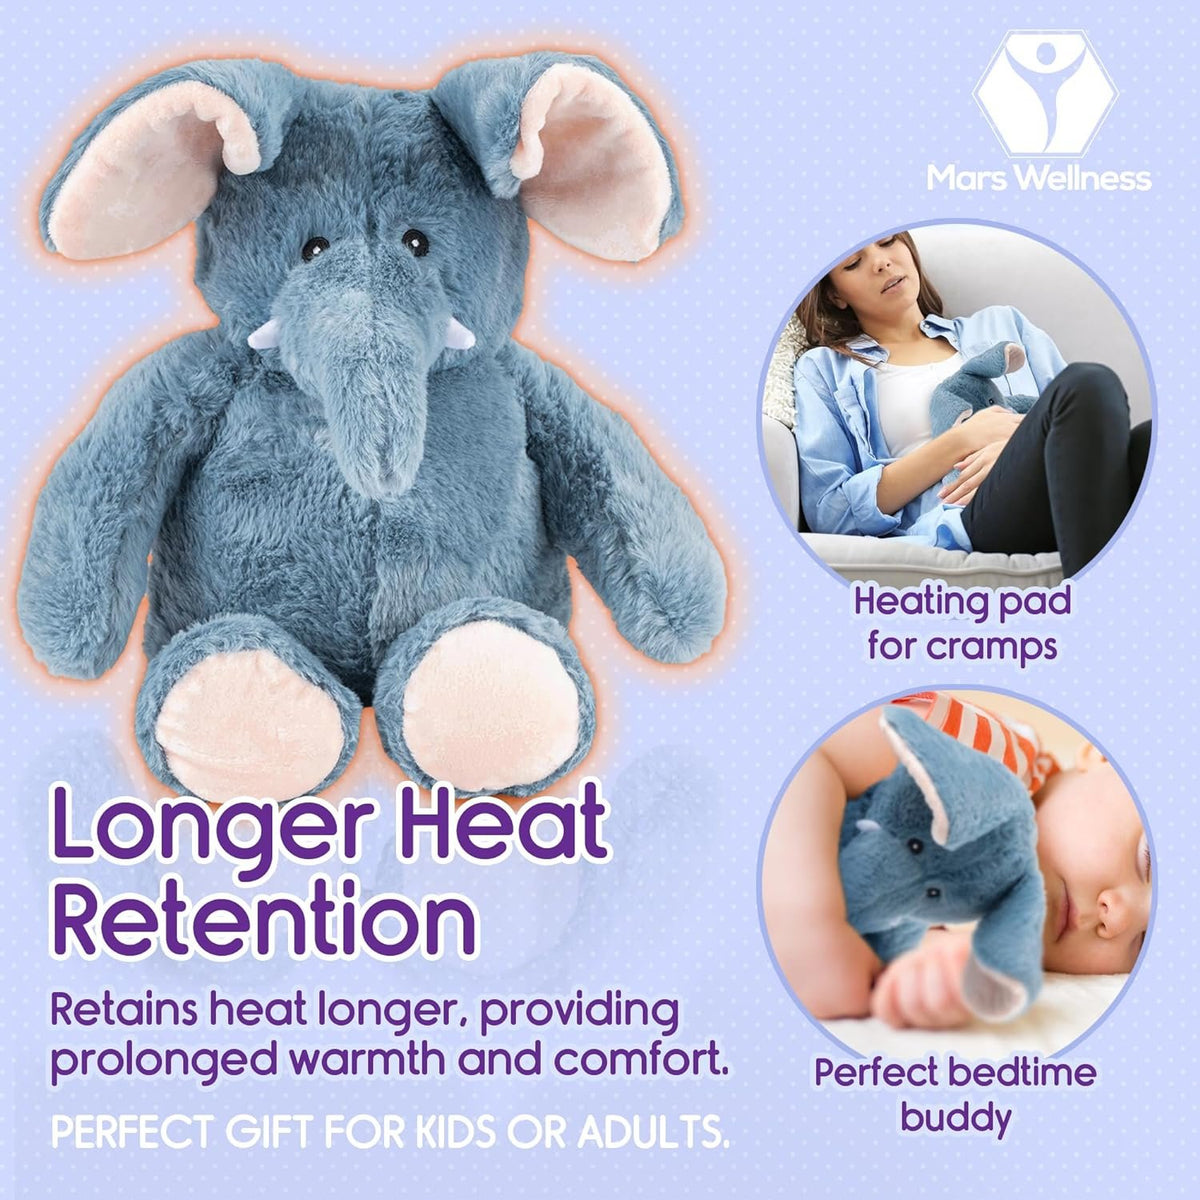 Lavender Scented Microwavable Plush Elephant - Heated Stuffed Animals - Hot or Cold Therapy, Bedtime Buddy, Travel Companion, Anxiety and Colic Relief - Elephant